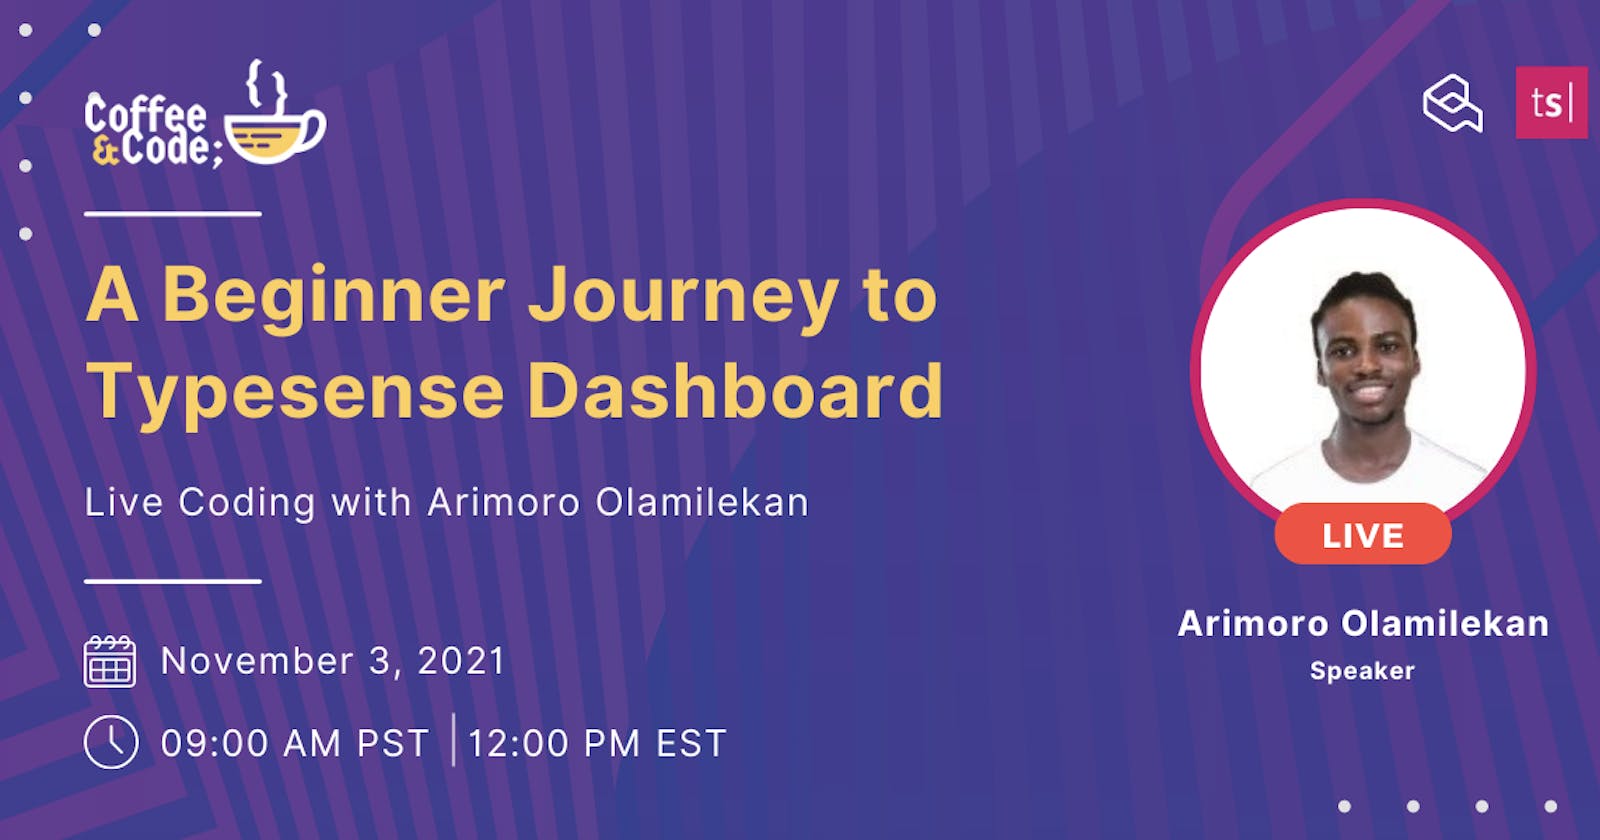 Join Olamilekan Arimoro and Aviyel in Getting Started with Typesense Dashboard!